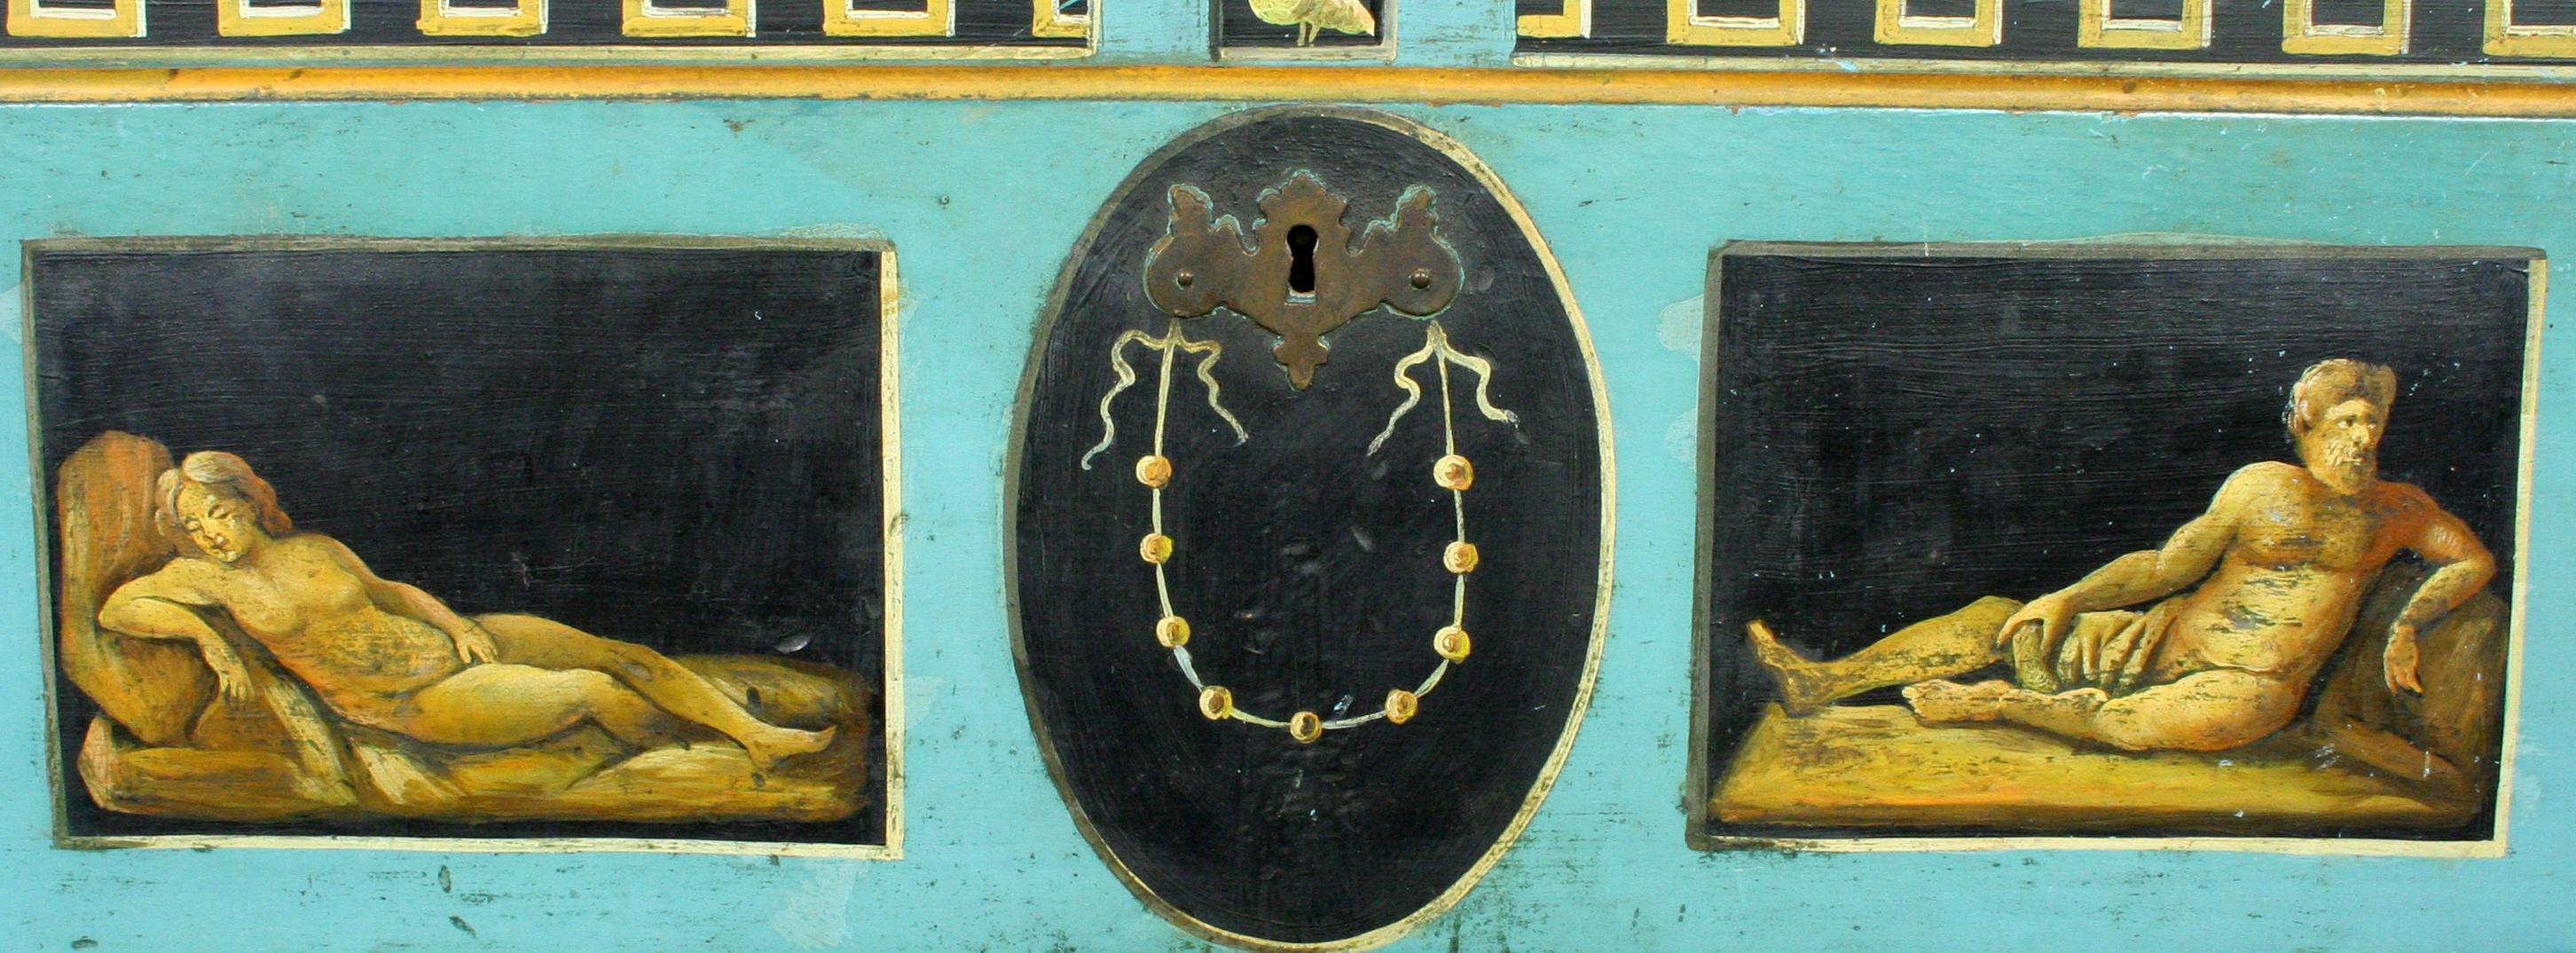 Late 19th century Italian neoclassical aqua blue hand painted and decorated two drawer chest or commode. Hand painted faux marble top, Greek key design and neoclassical urns and images. Brilliant aqua, black and gold gilt decoration. Truly a work of